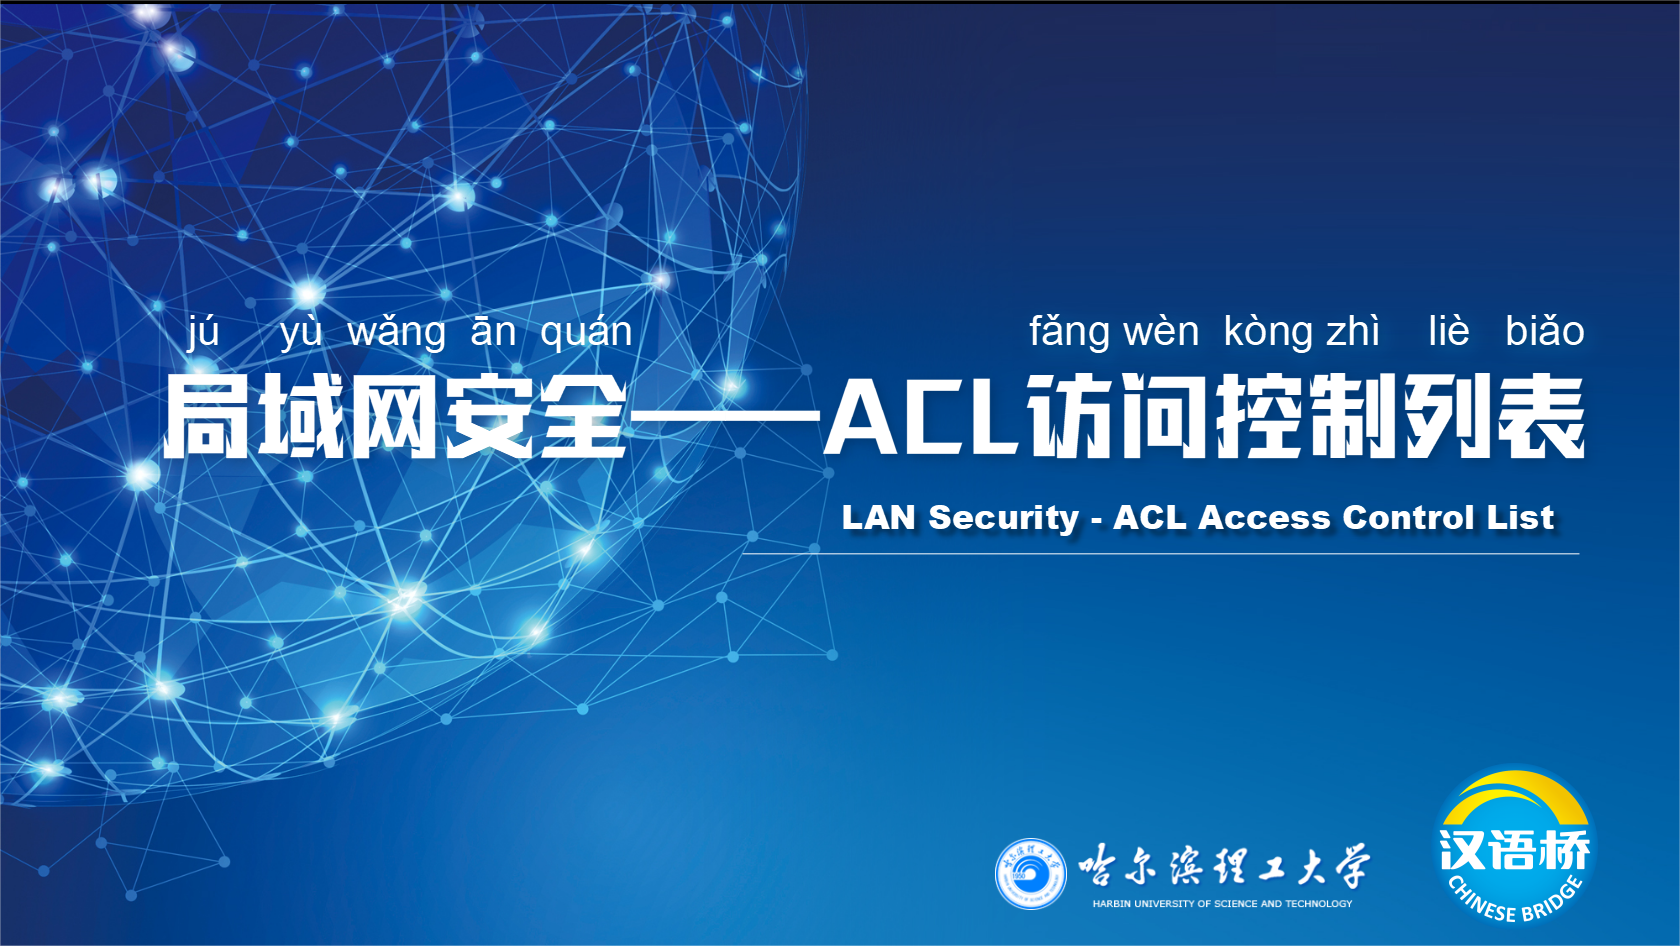 LAN Security - ACL Access Control List